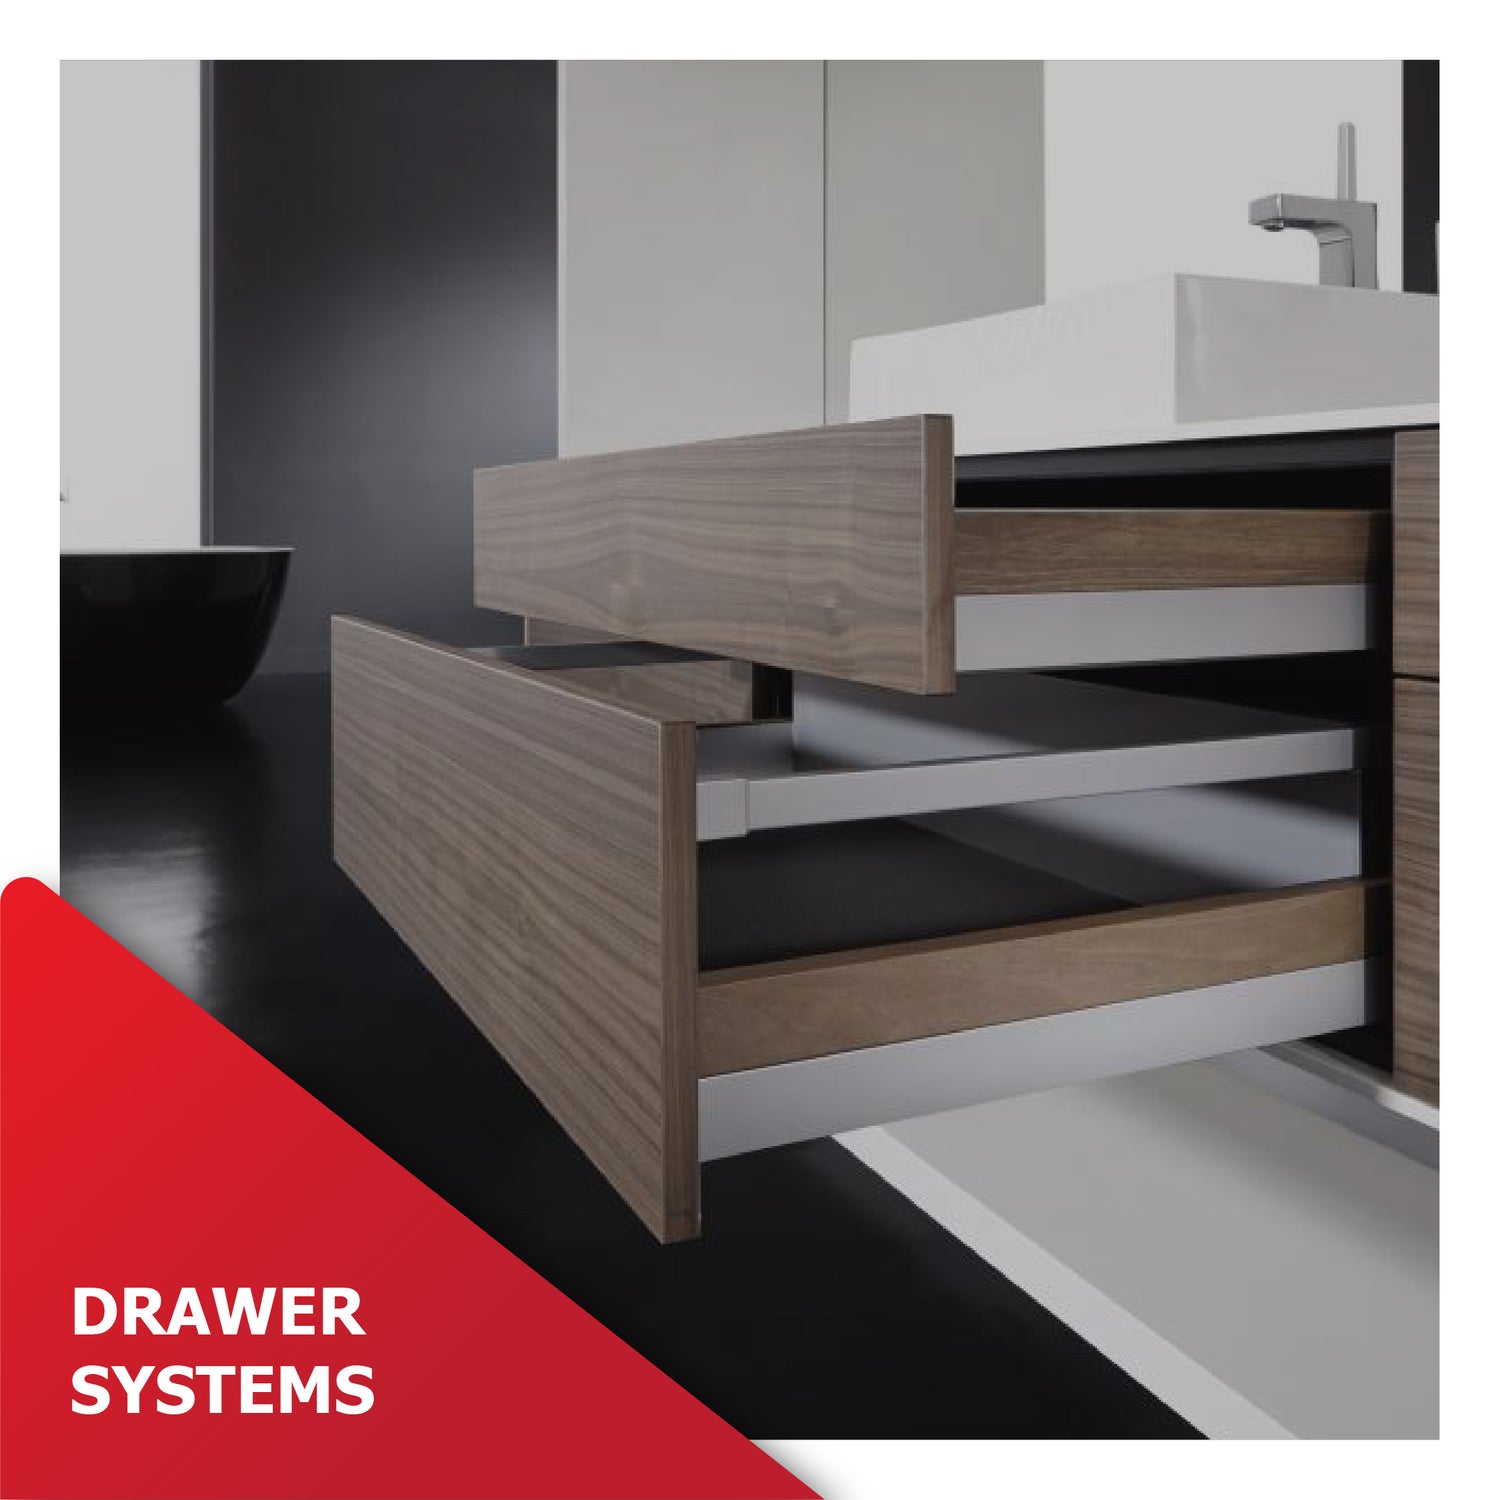 Drawer Systems - Efficient and Versatile Storage Solutions for Your Home or Office